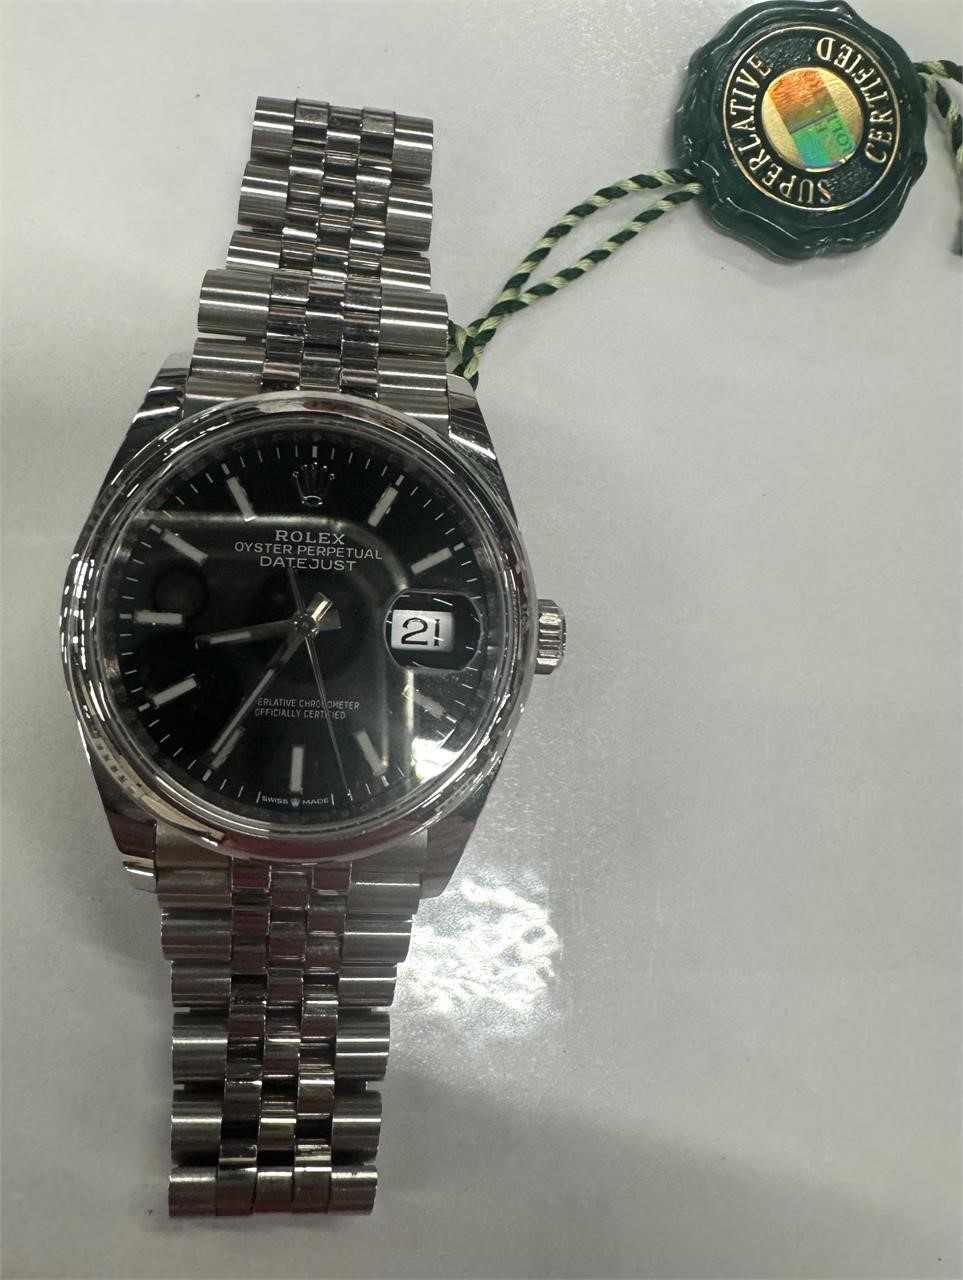 Rolex. Néw condition. Box and papers